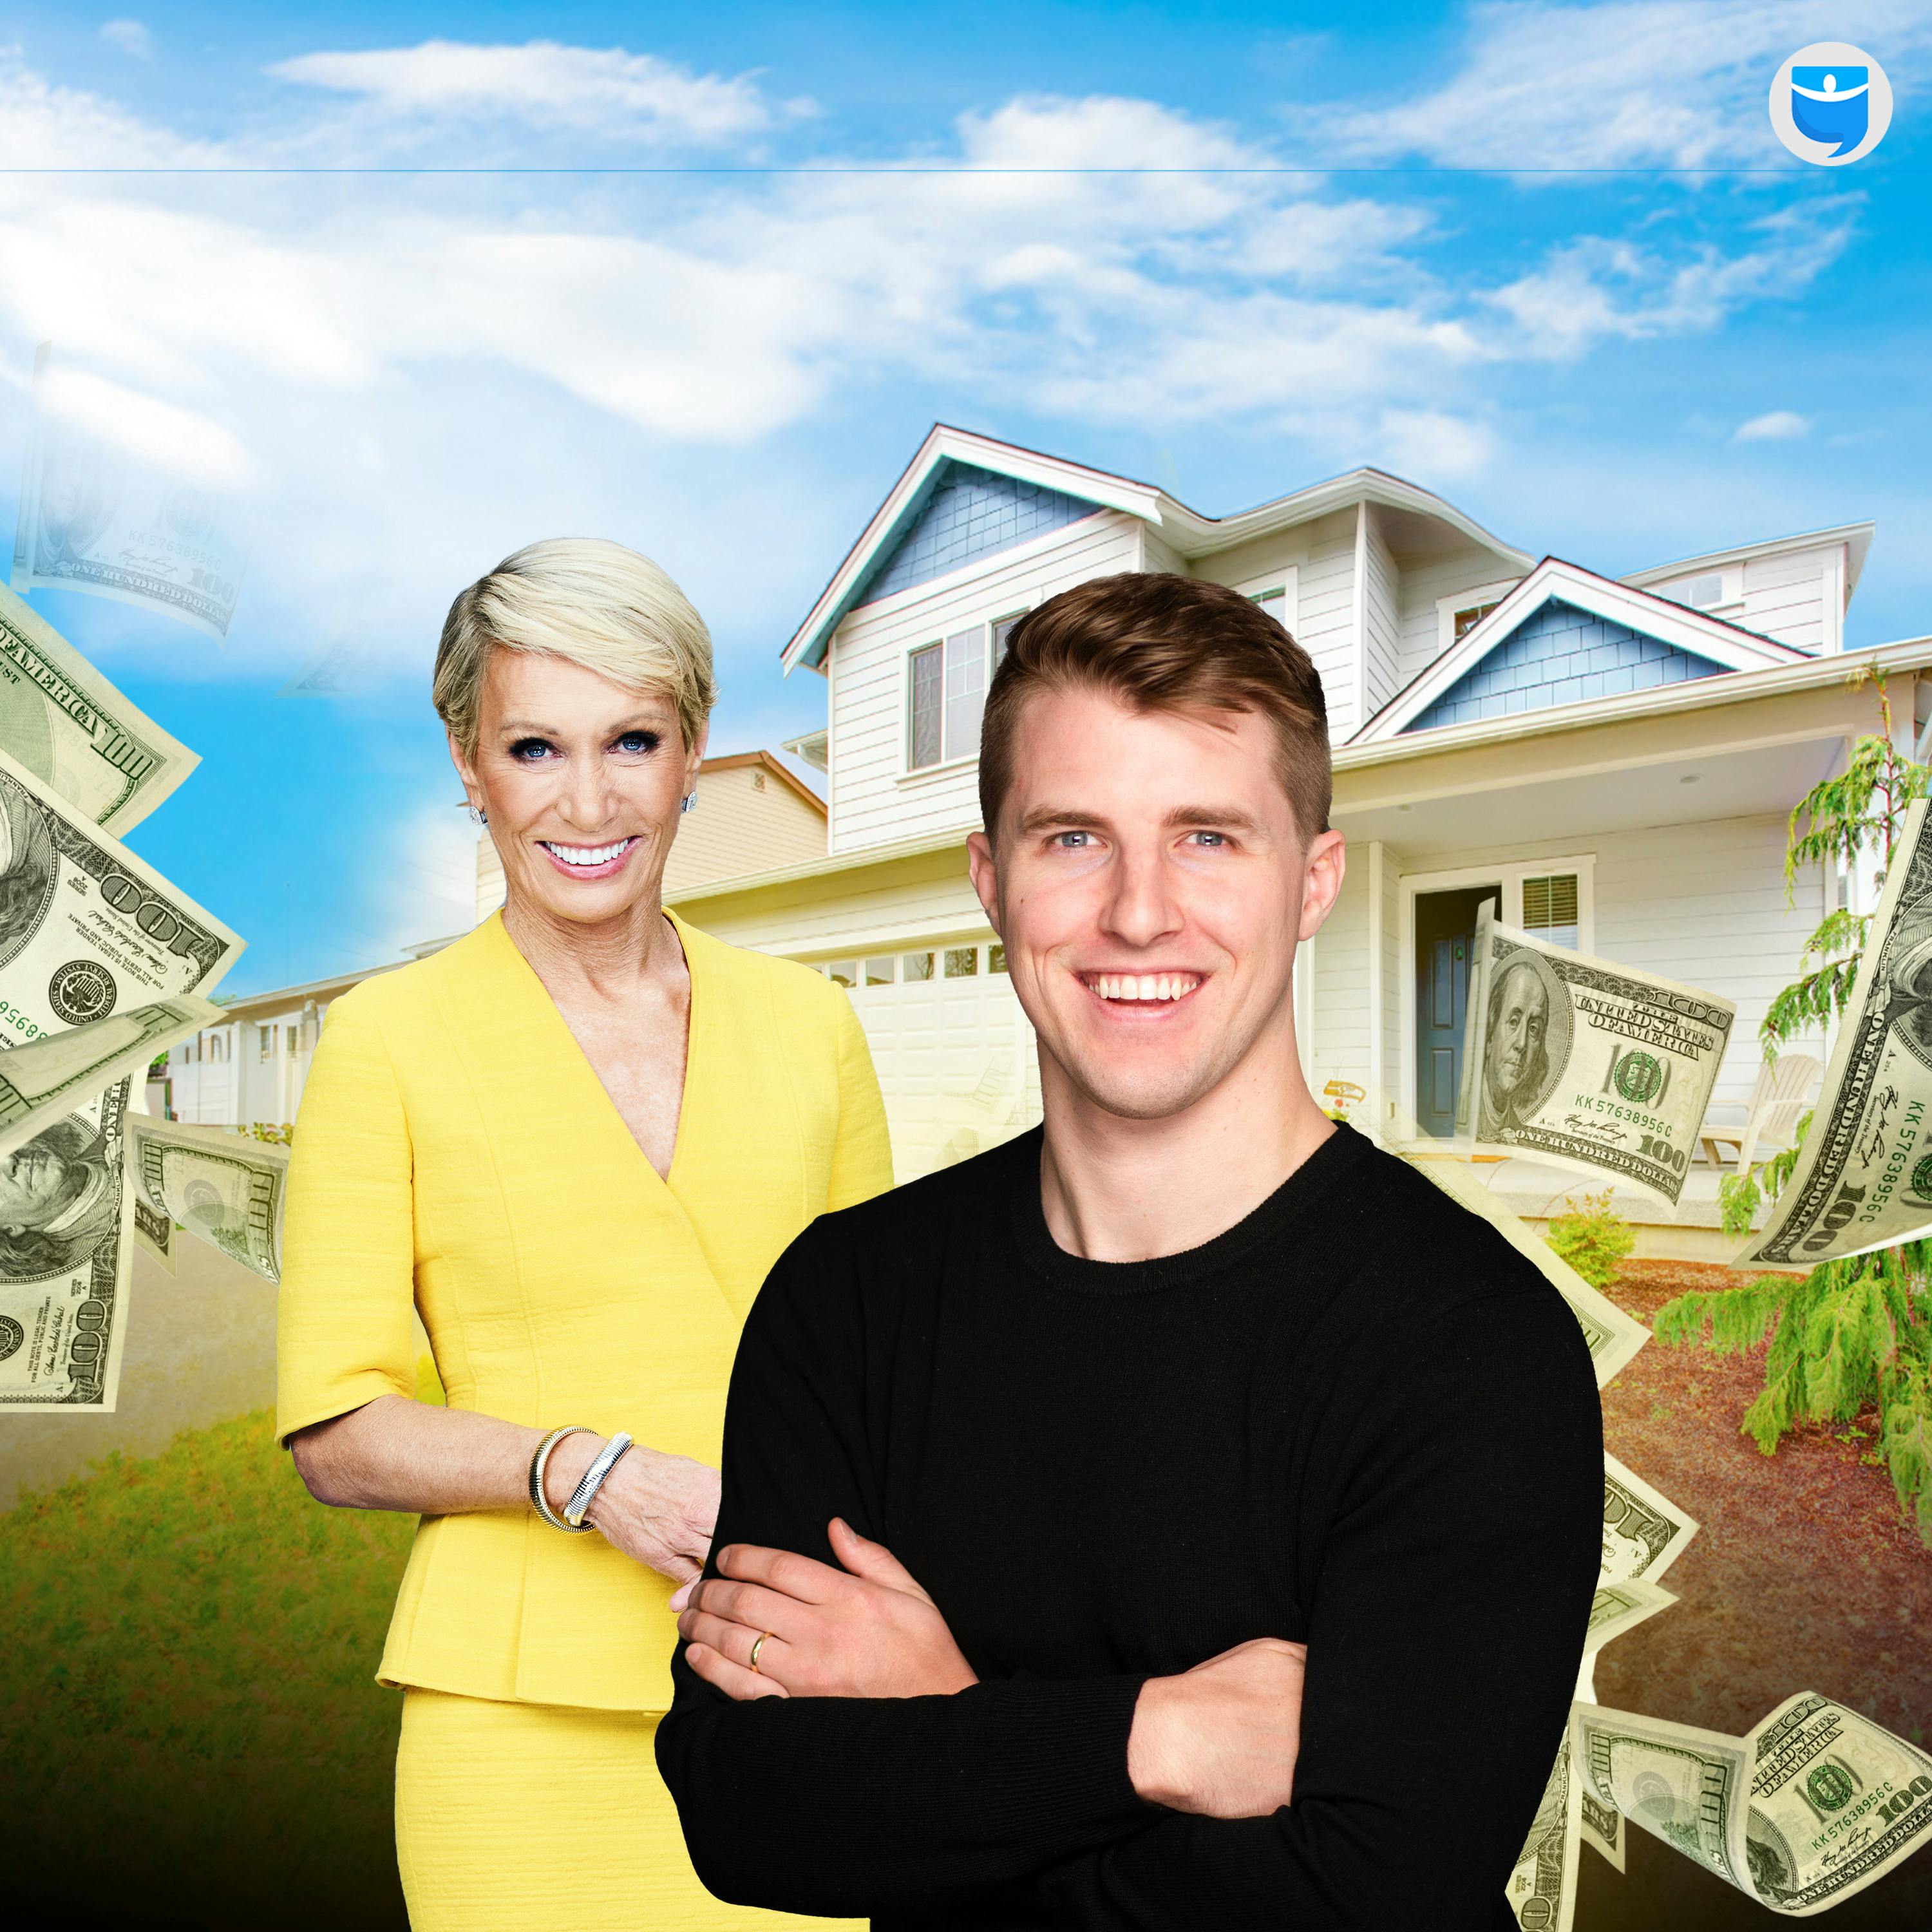 842: Why Barbara Corcoran’s Son, Tom Higgins, Went Against Her Investing Advice